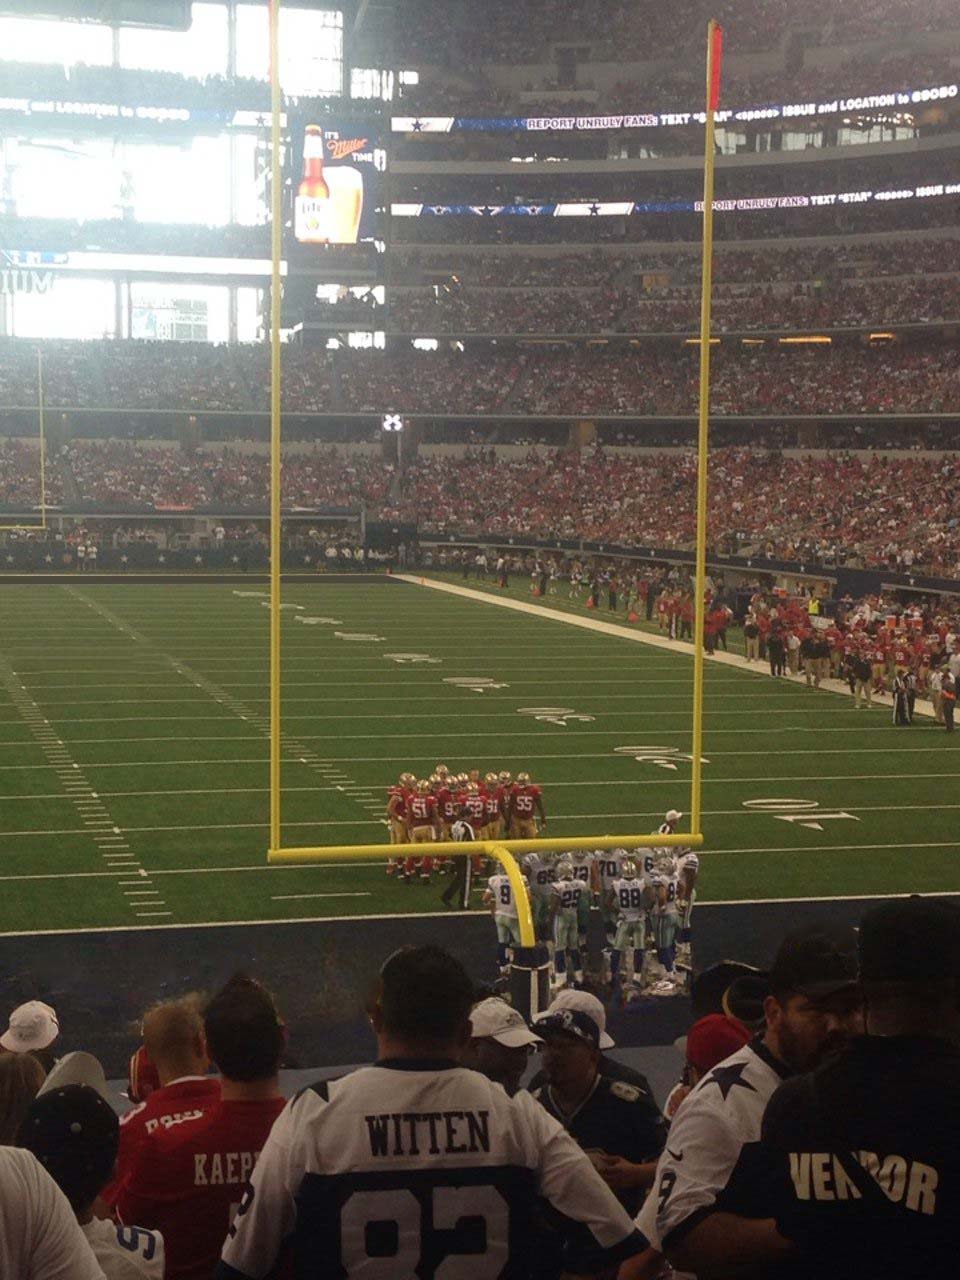 section 149, row 13 seat view  for football - at&t stadium (cowboys stadium)